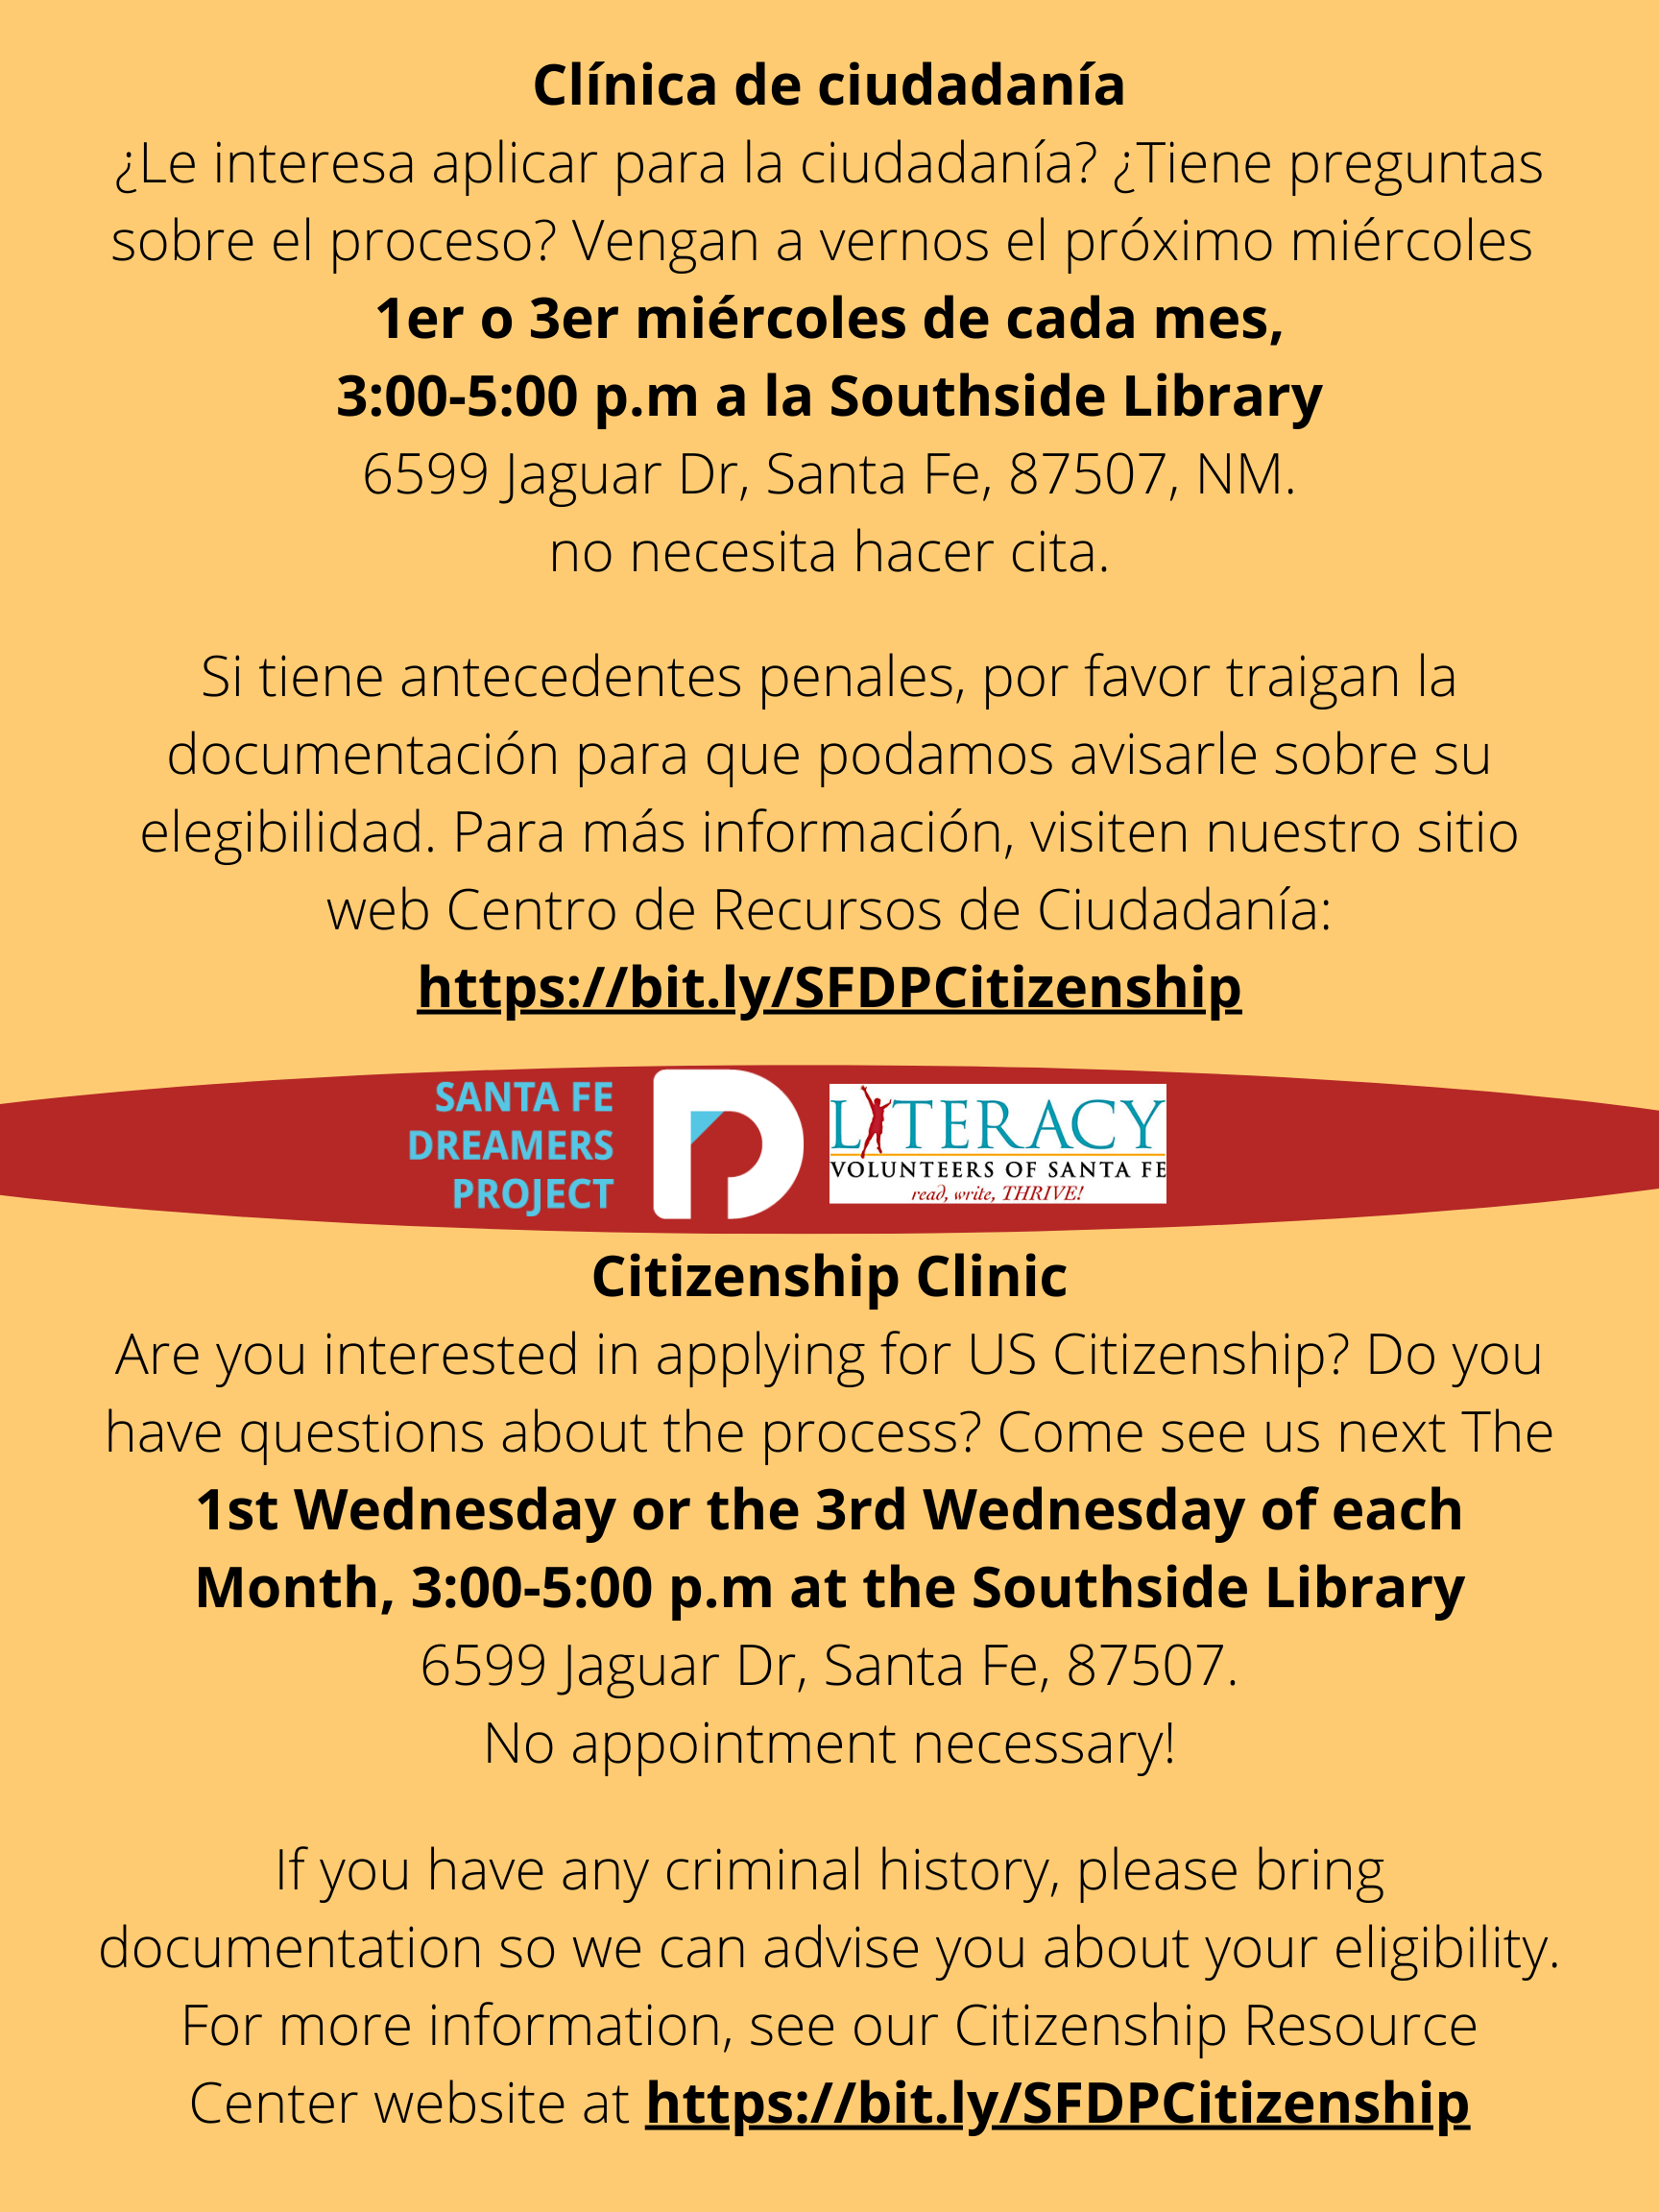 Dreamers Clinic